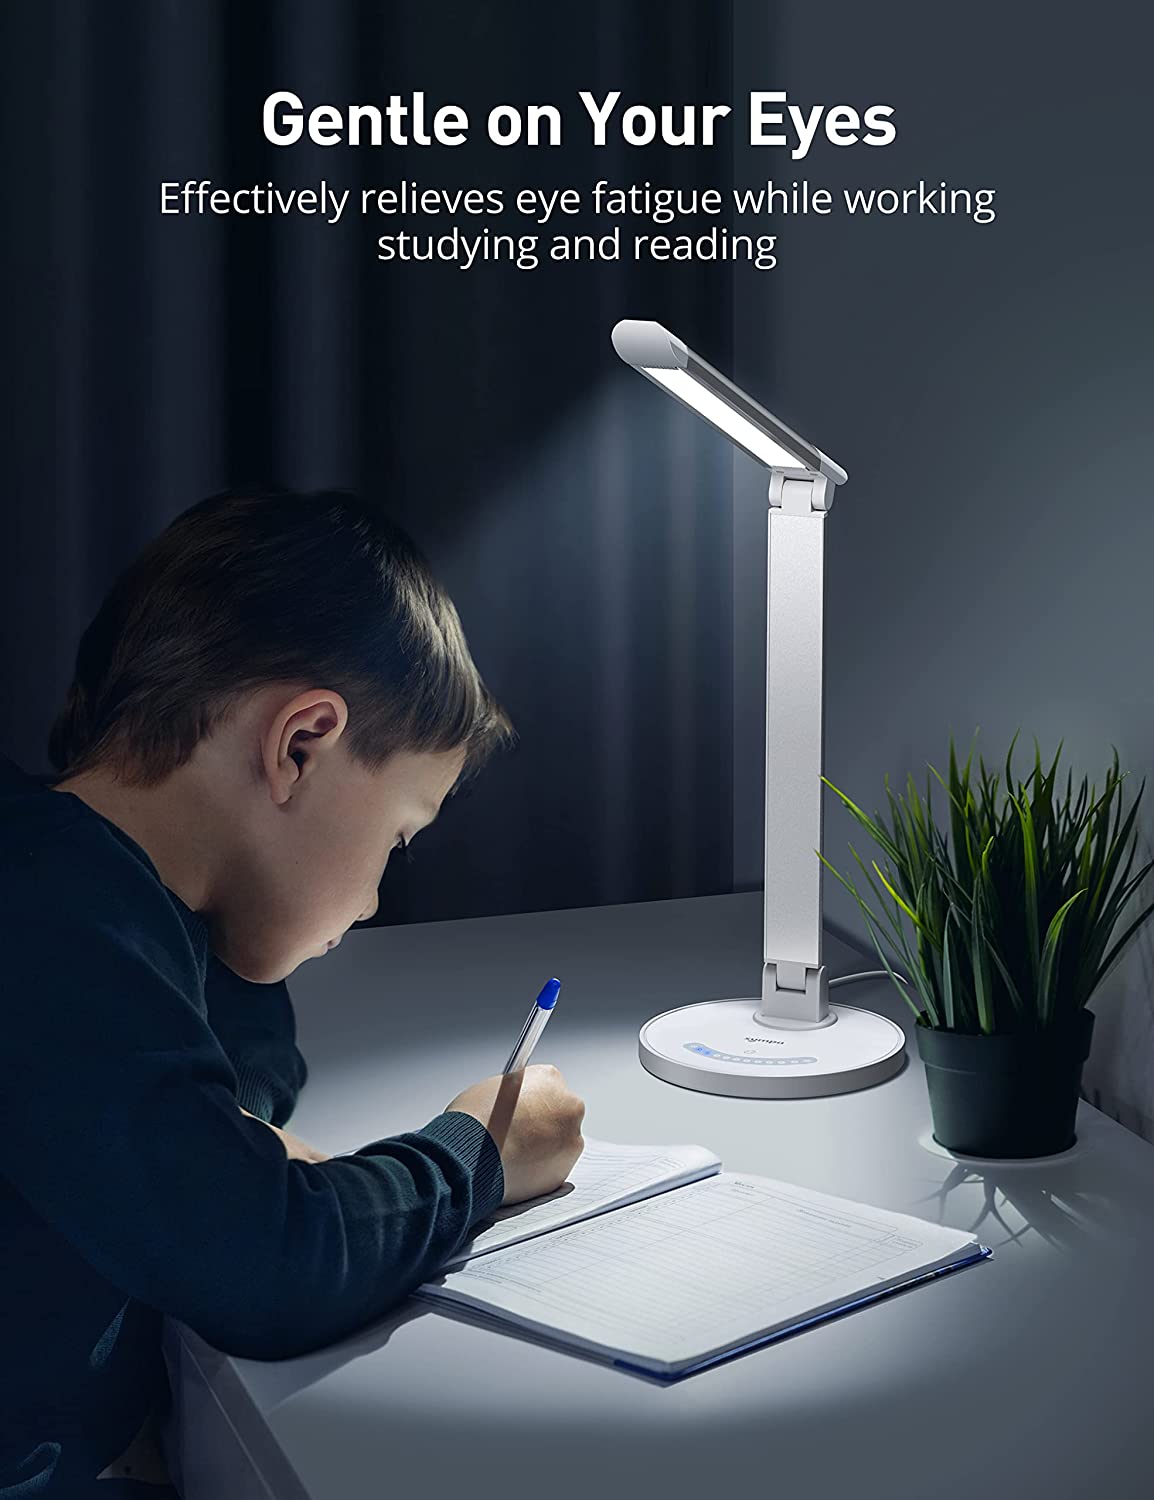 LED Desk Lamp, sympa Dimmable Table Lamp with 7 Brightness Levels, 5 Color Temperatures, USB Charging Port, Touch Control, Memory Function